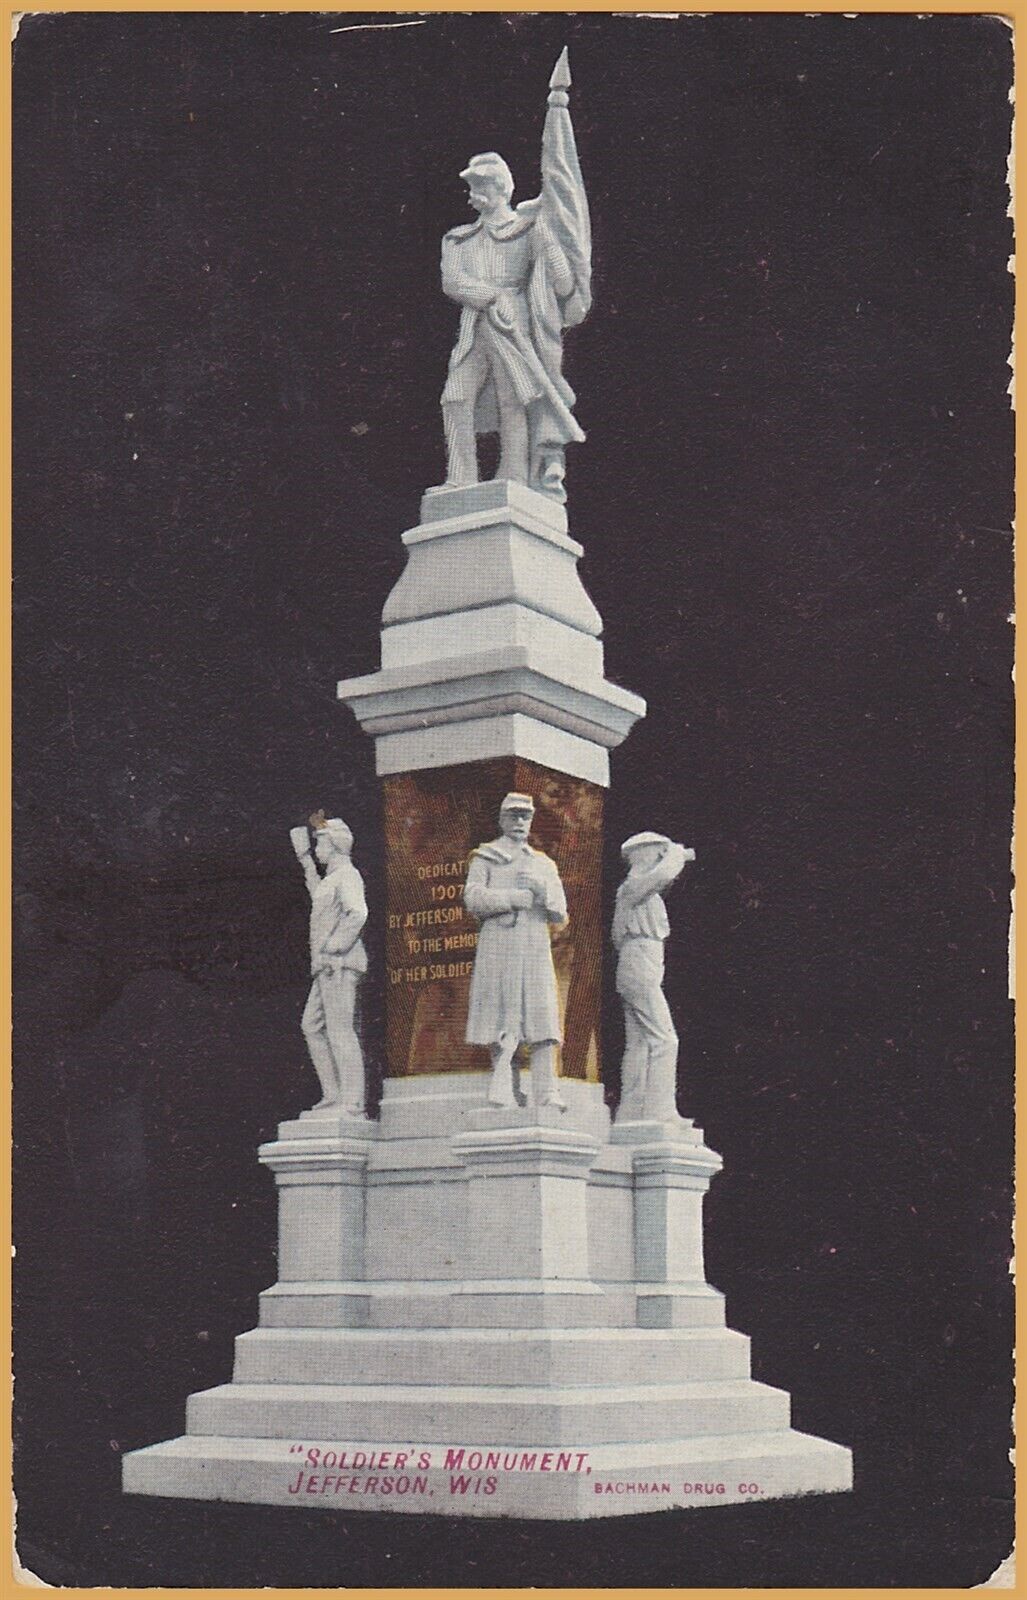 Jefferson, WIS., Soldiers Monument - Bachmann Drug Post Card - 1911